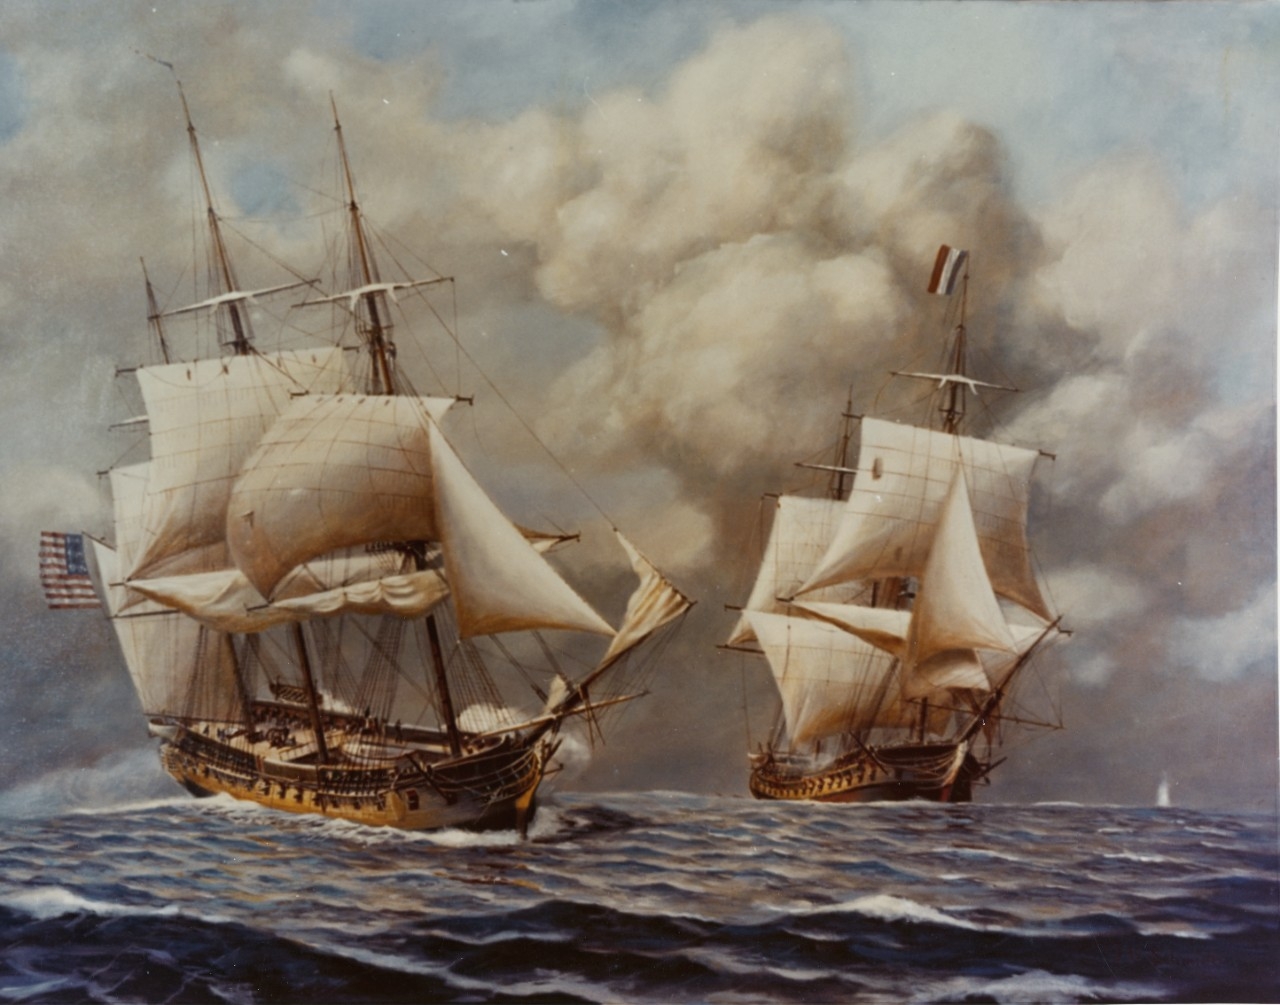 Action between U.S. Frigate Constellation and French Frigate Insurgente, 9 February 1799